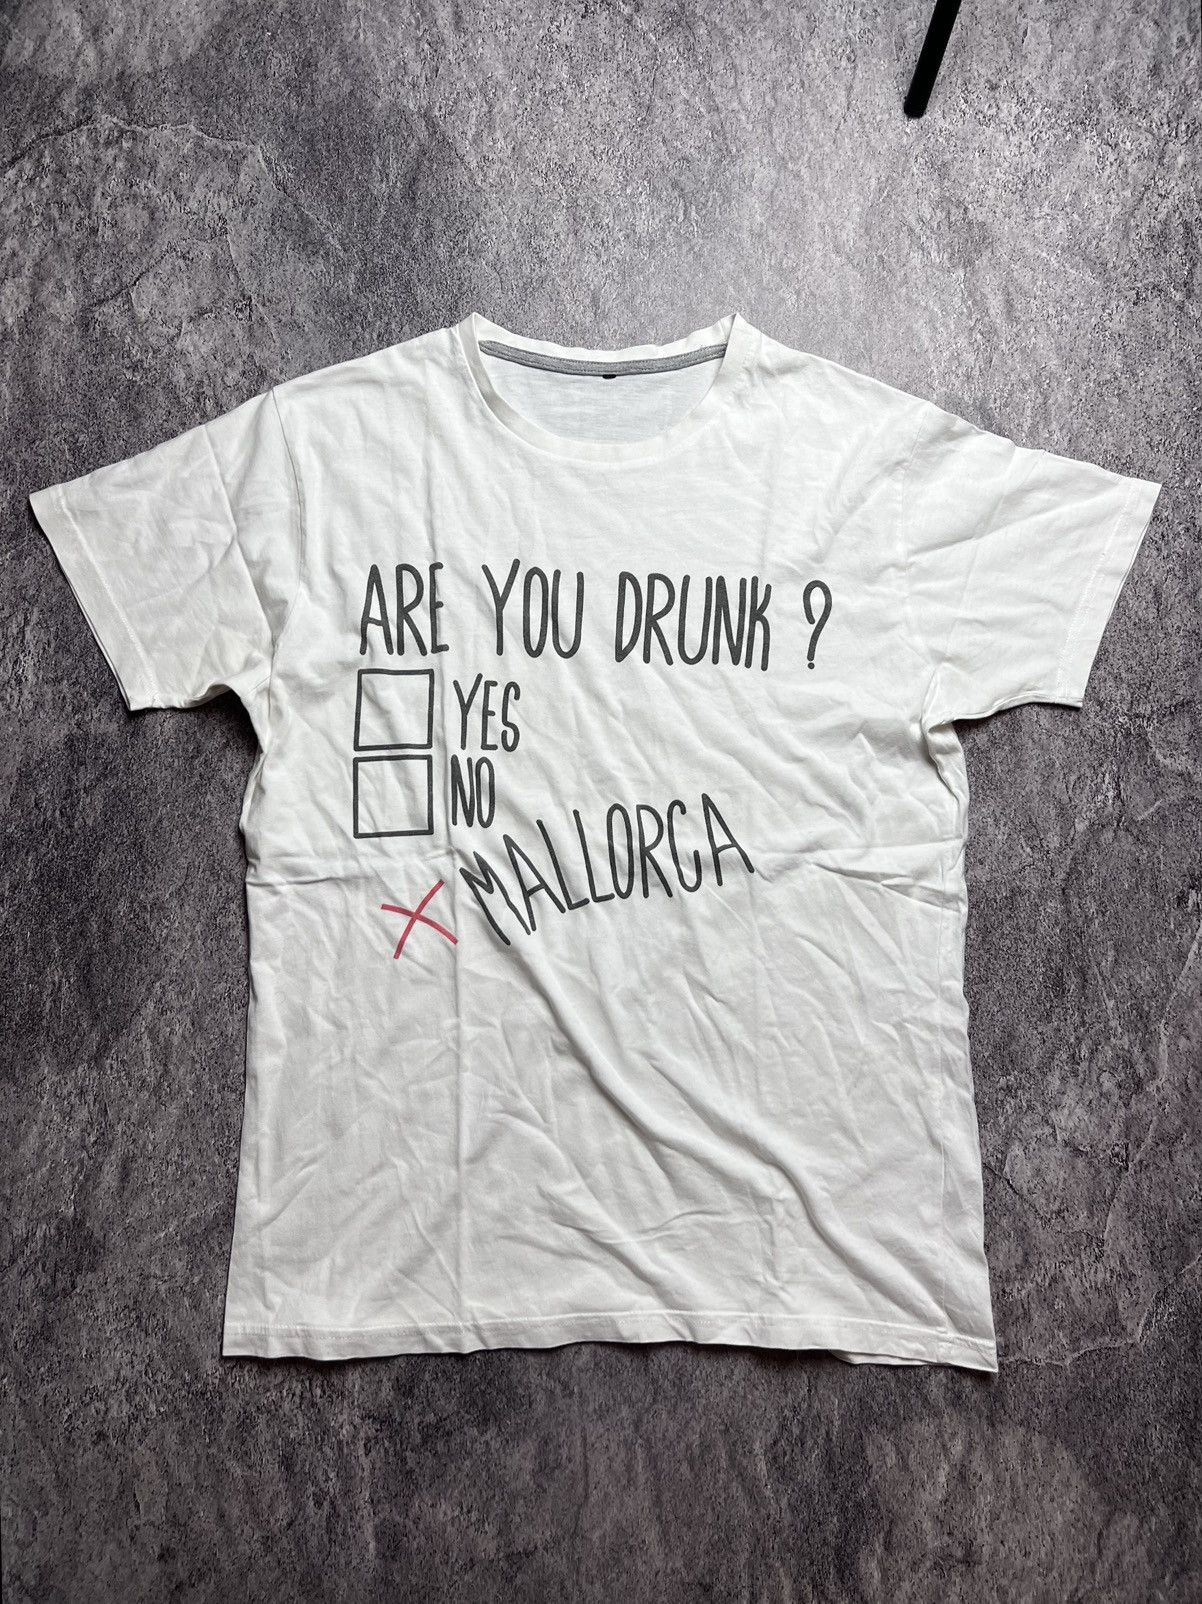 Pre-owned Humor X Vintage Y2k Adult Humor Drunk Alcohol Japan Balenciaga Style Tee In White